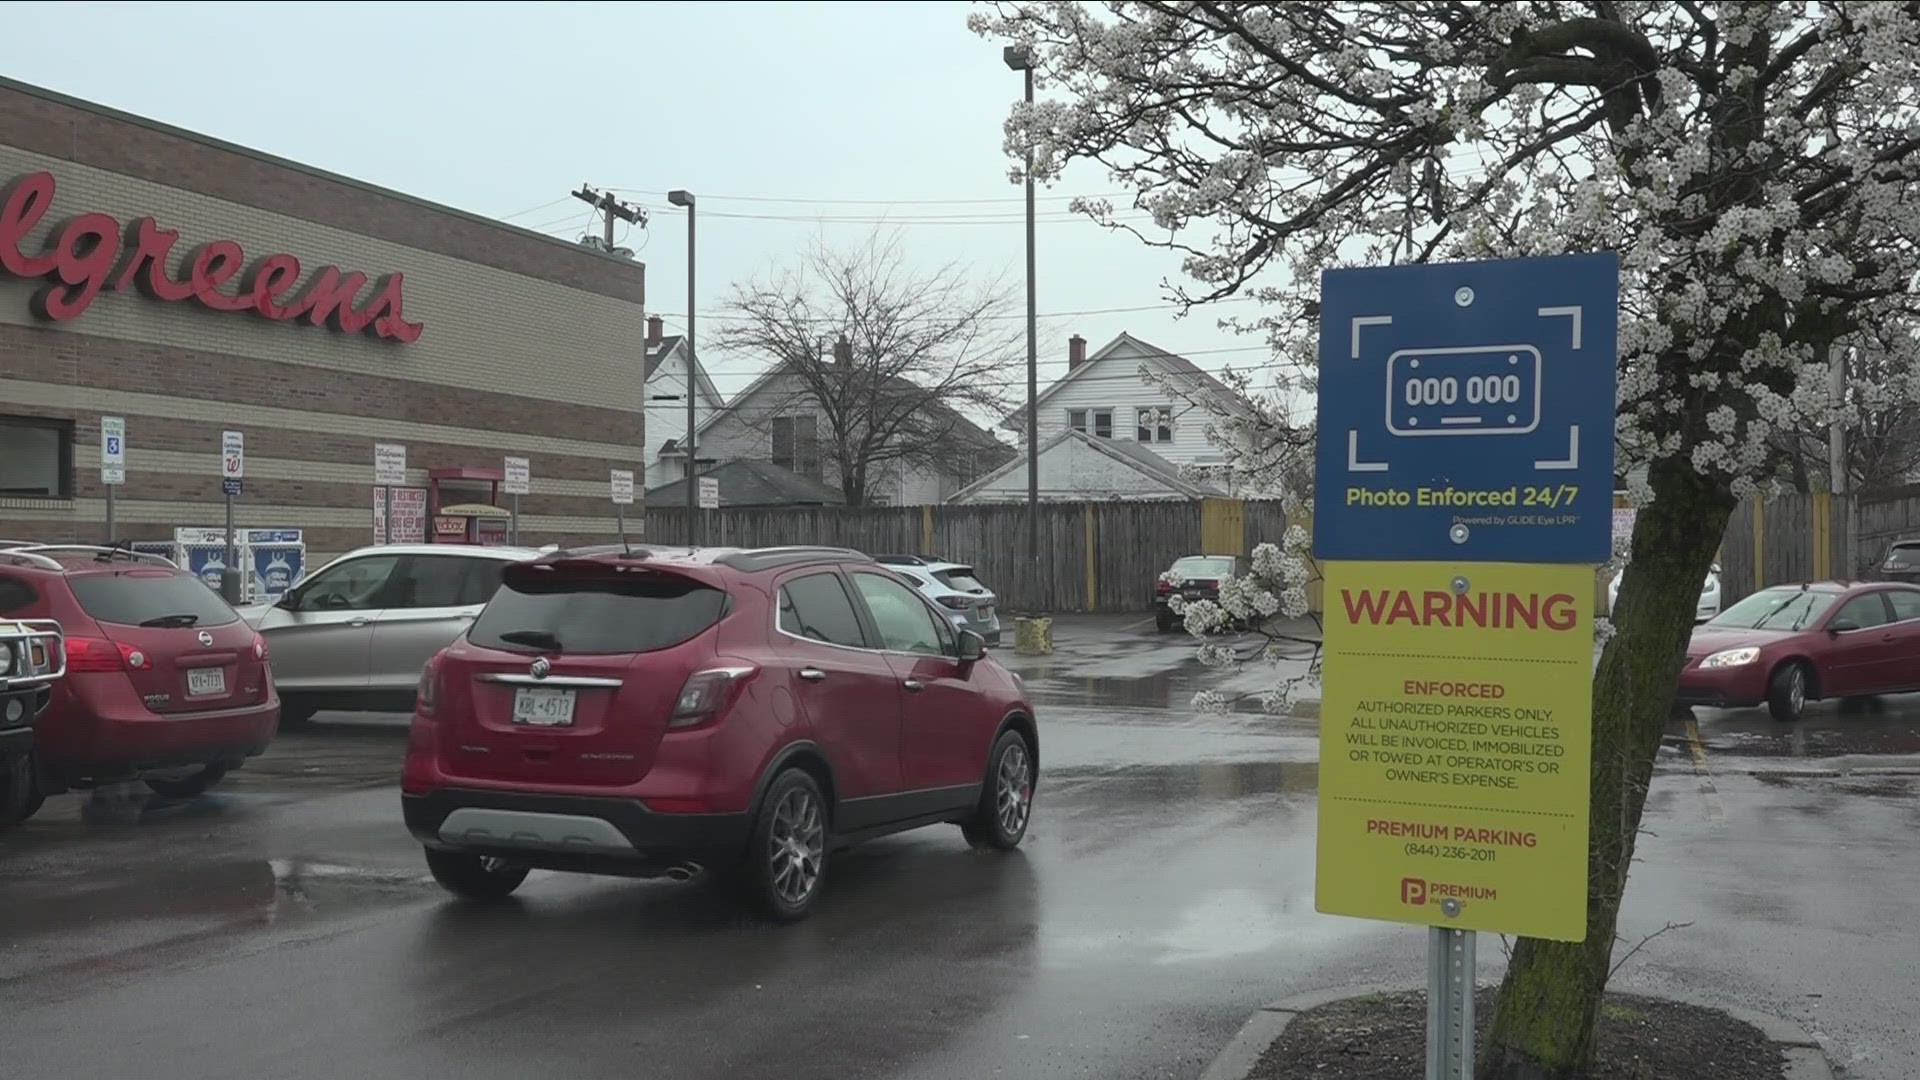 There are dedicated parking spaces for non-customers to use at the North Buffalo store, but now they're at a cost.